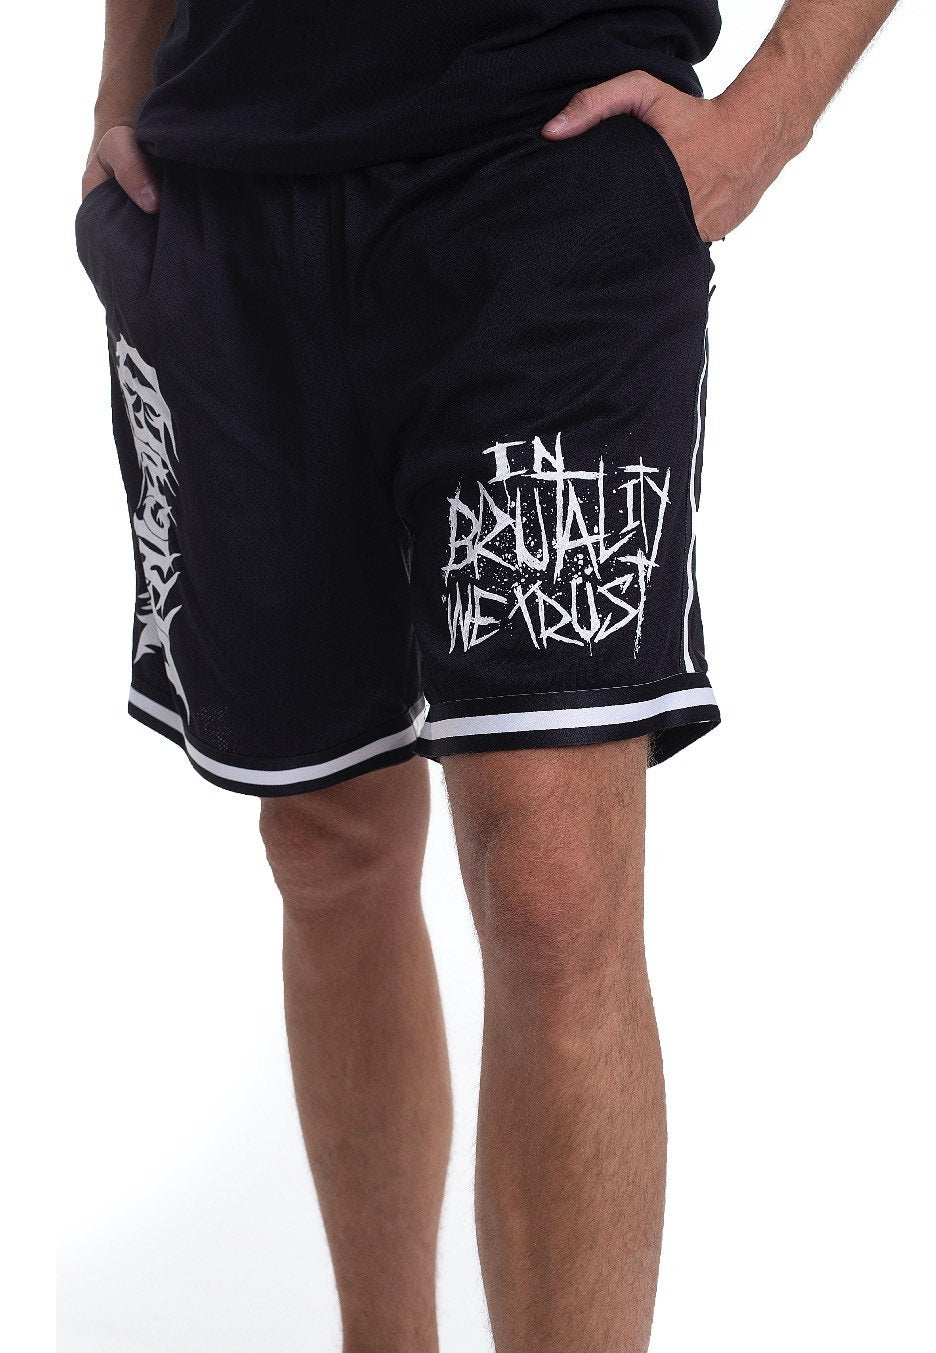 Benighted - Brutality Striped - Shorts